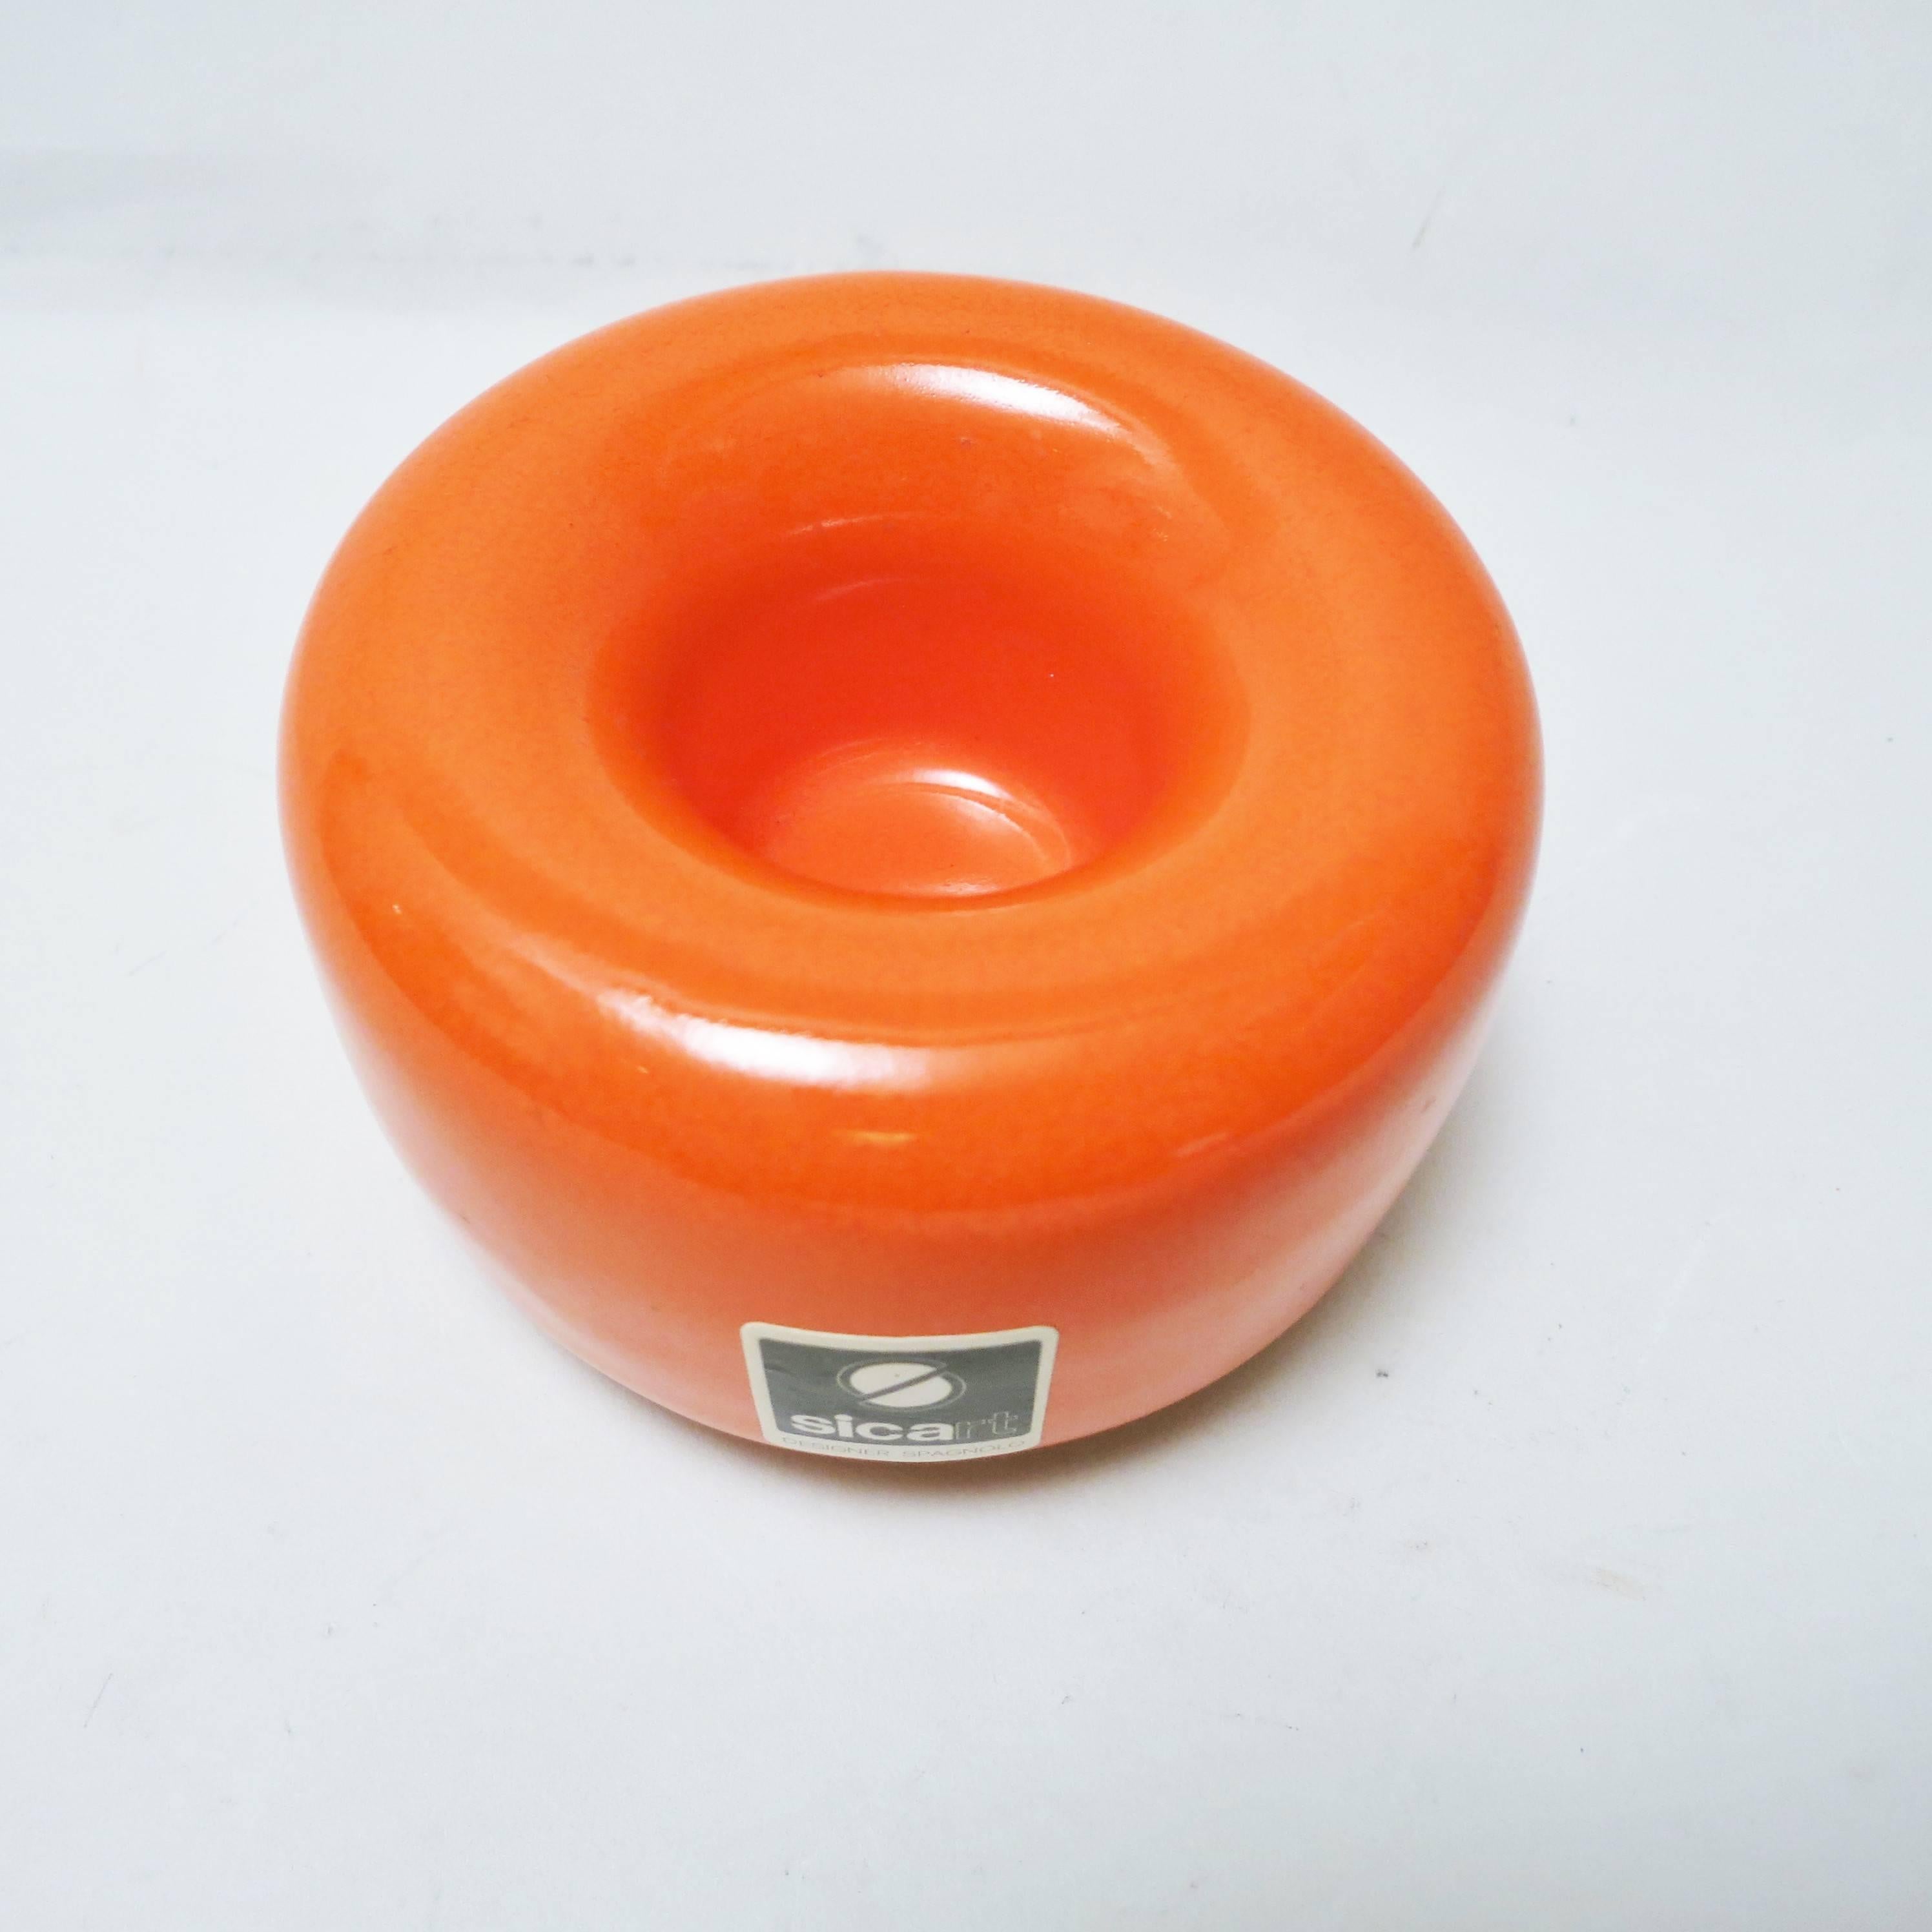 Circular and curved ashtray in orange enamelled ceramic designed by Pino Spagnolo for Sicart in the early 1970s. Labelled on the edge, stamped under the base.